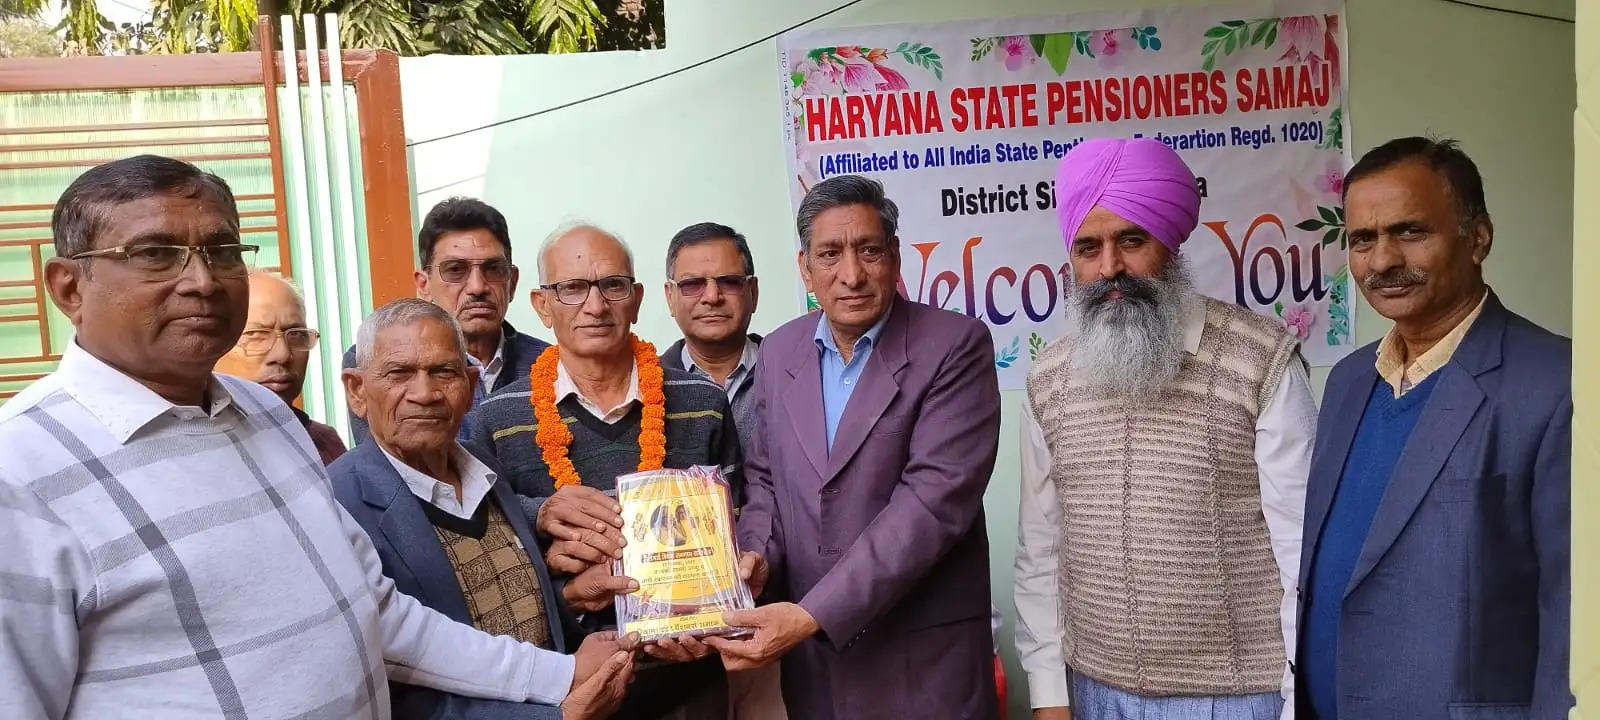 Retired employees celebrated Pensioners Day